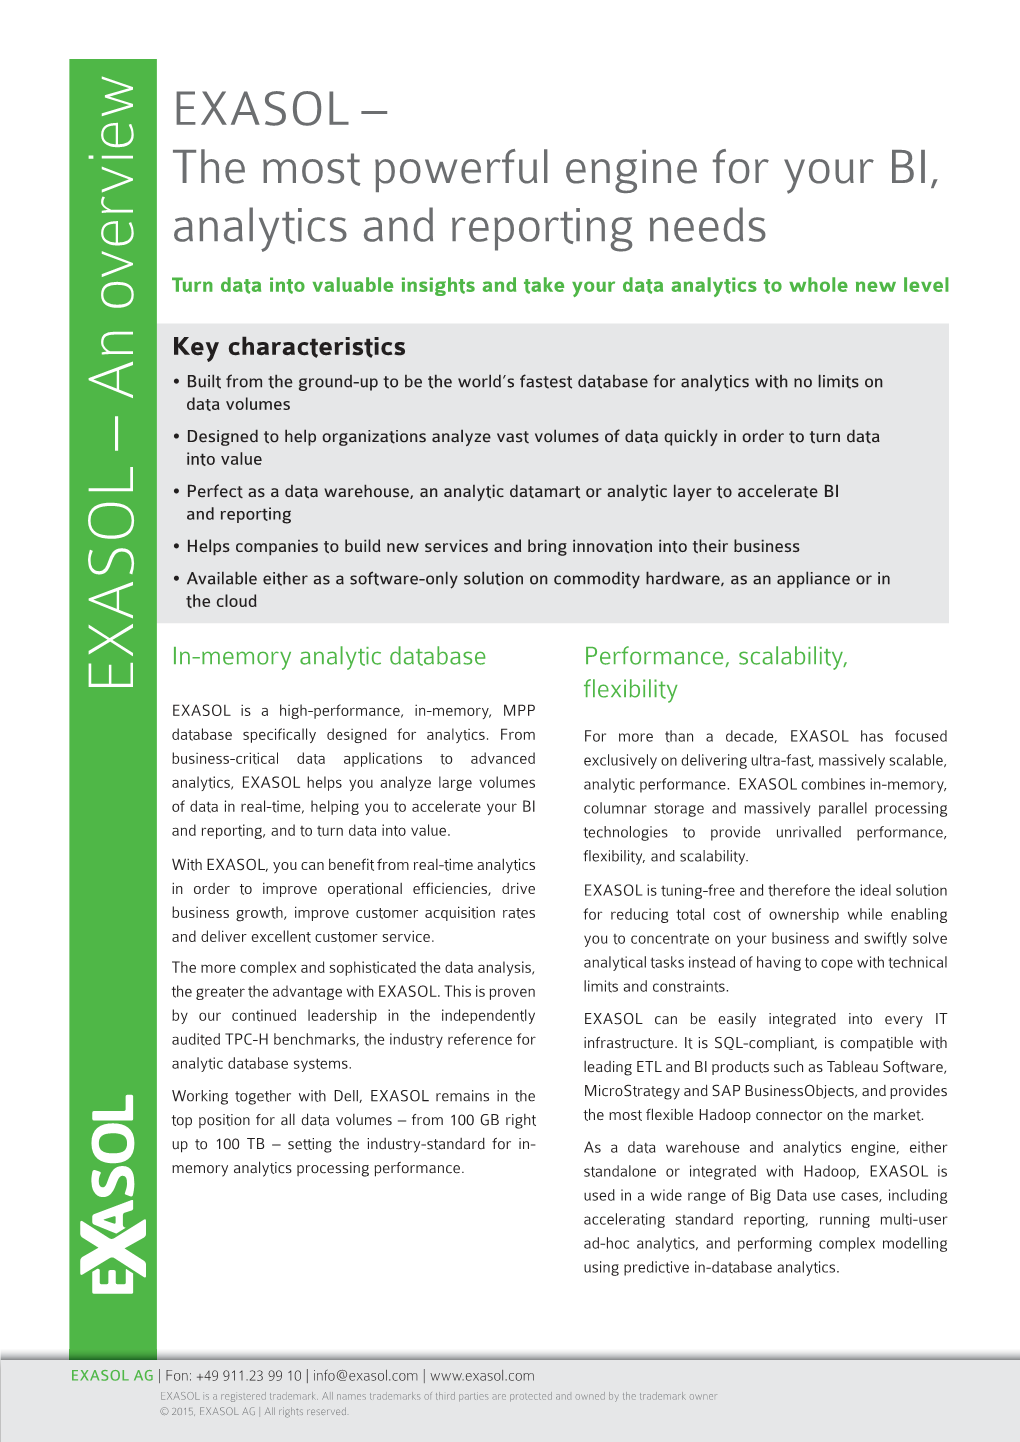 An Overview Flexibility EXASOL Is a High-Performance, In-Memory, MPP Database Specifically Designed for Analytics